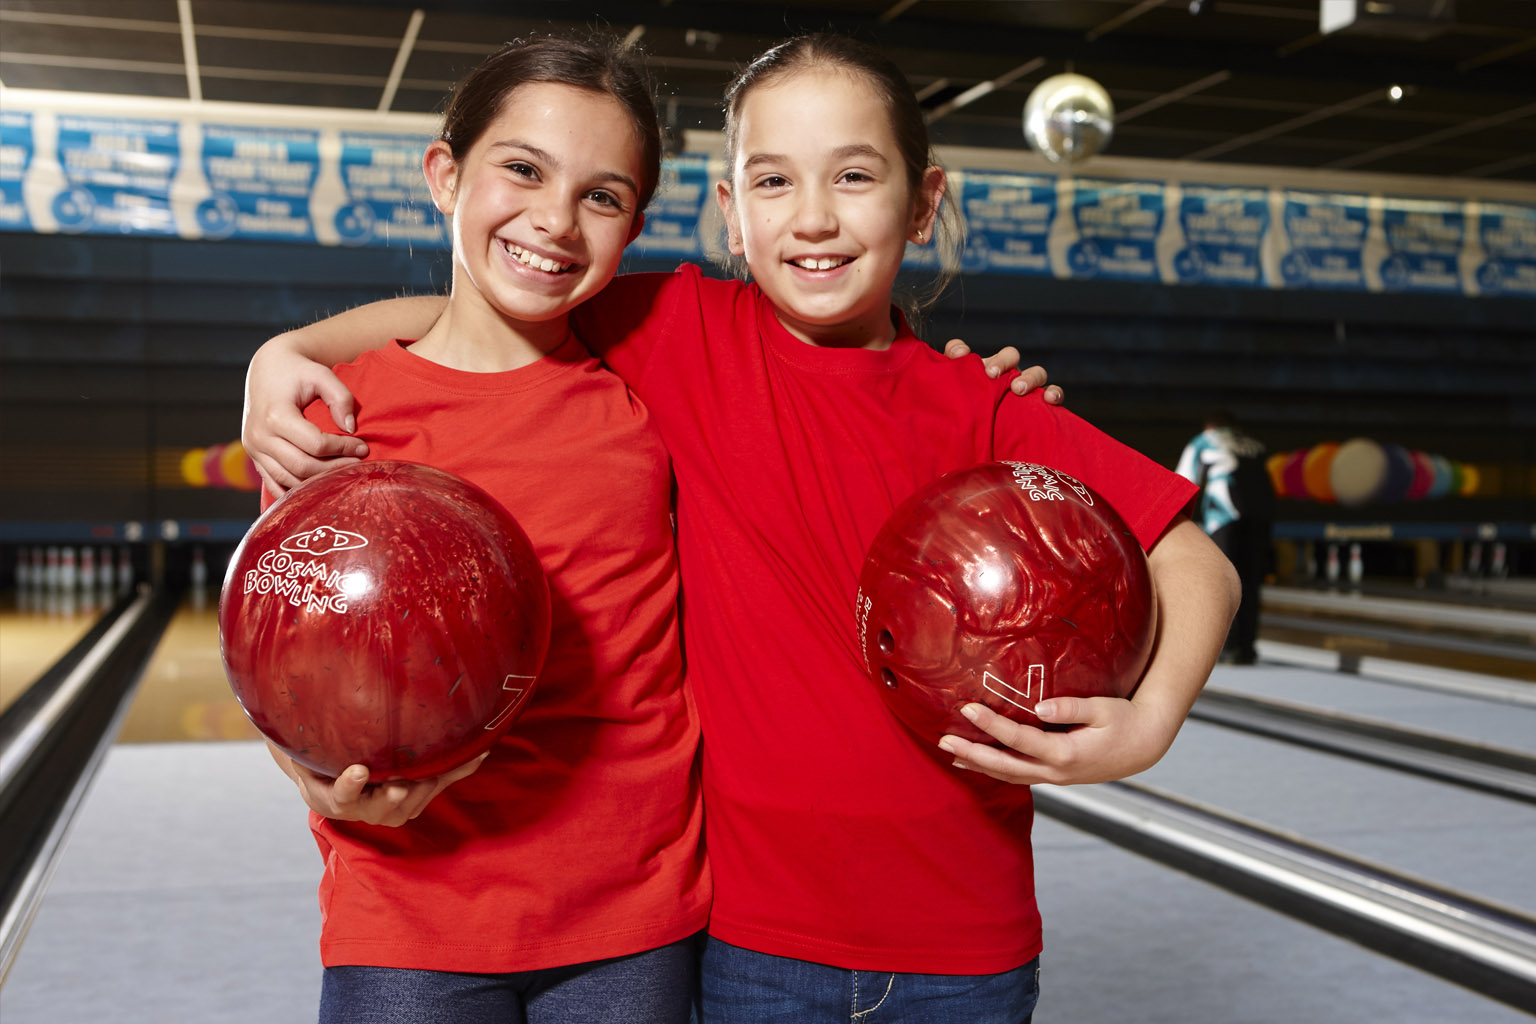 Two girls holding bowling balls standing together at a tenpin bowling alley